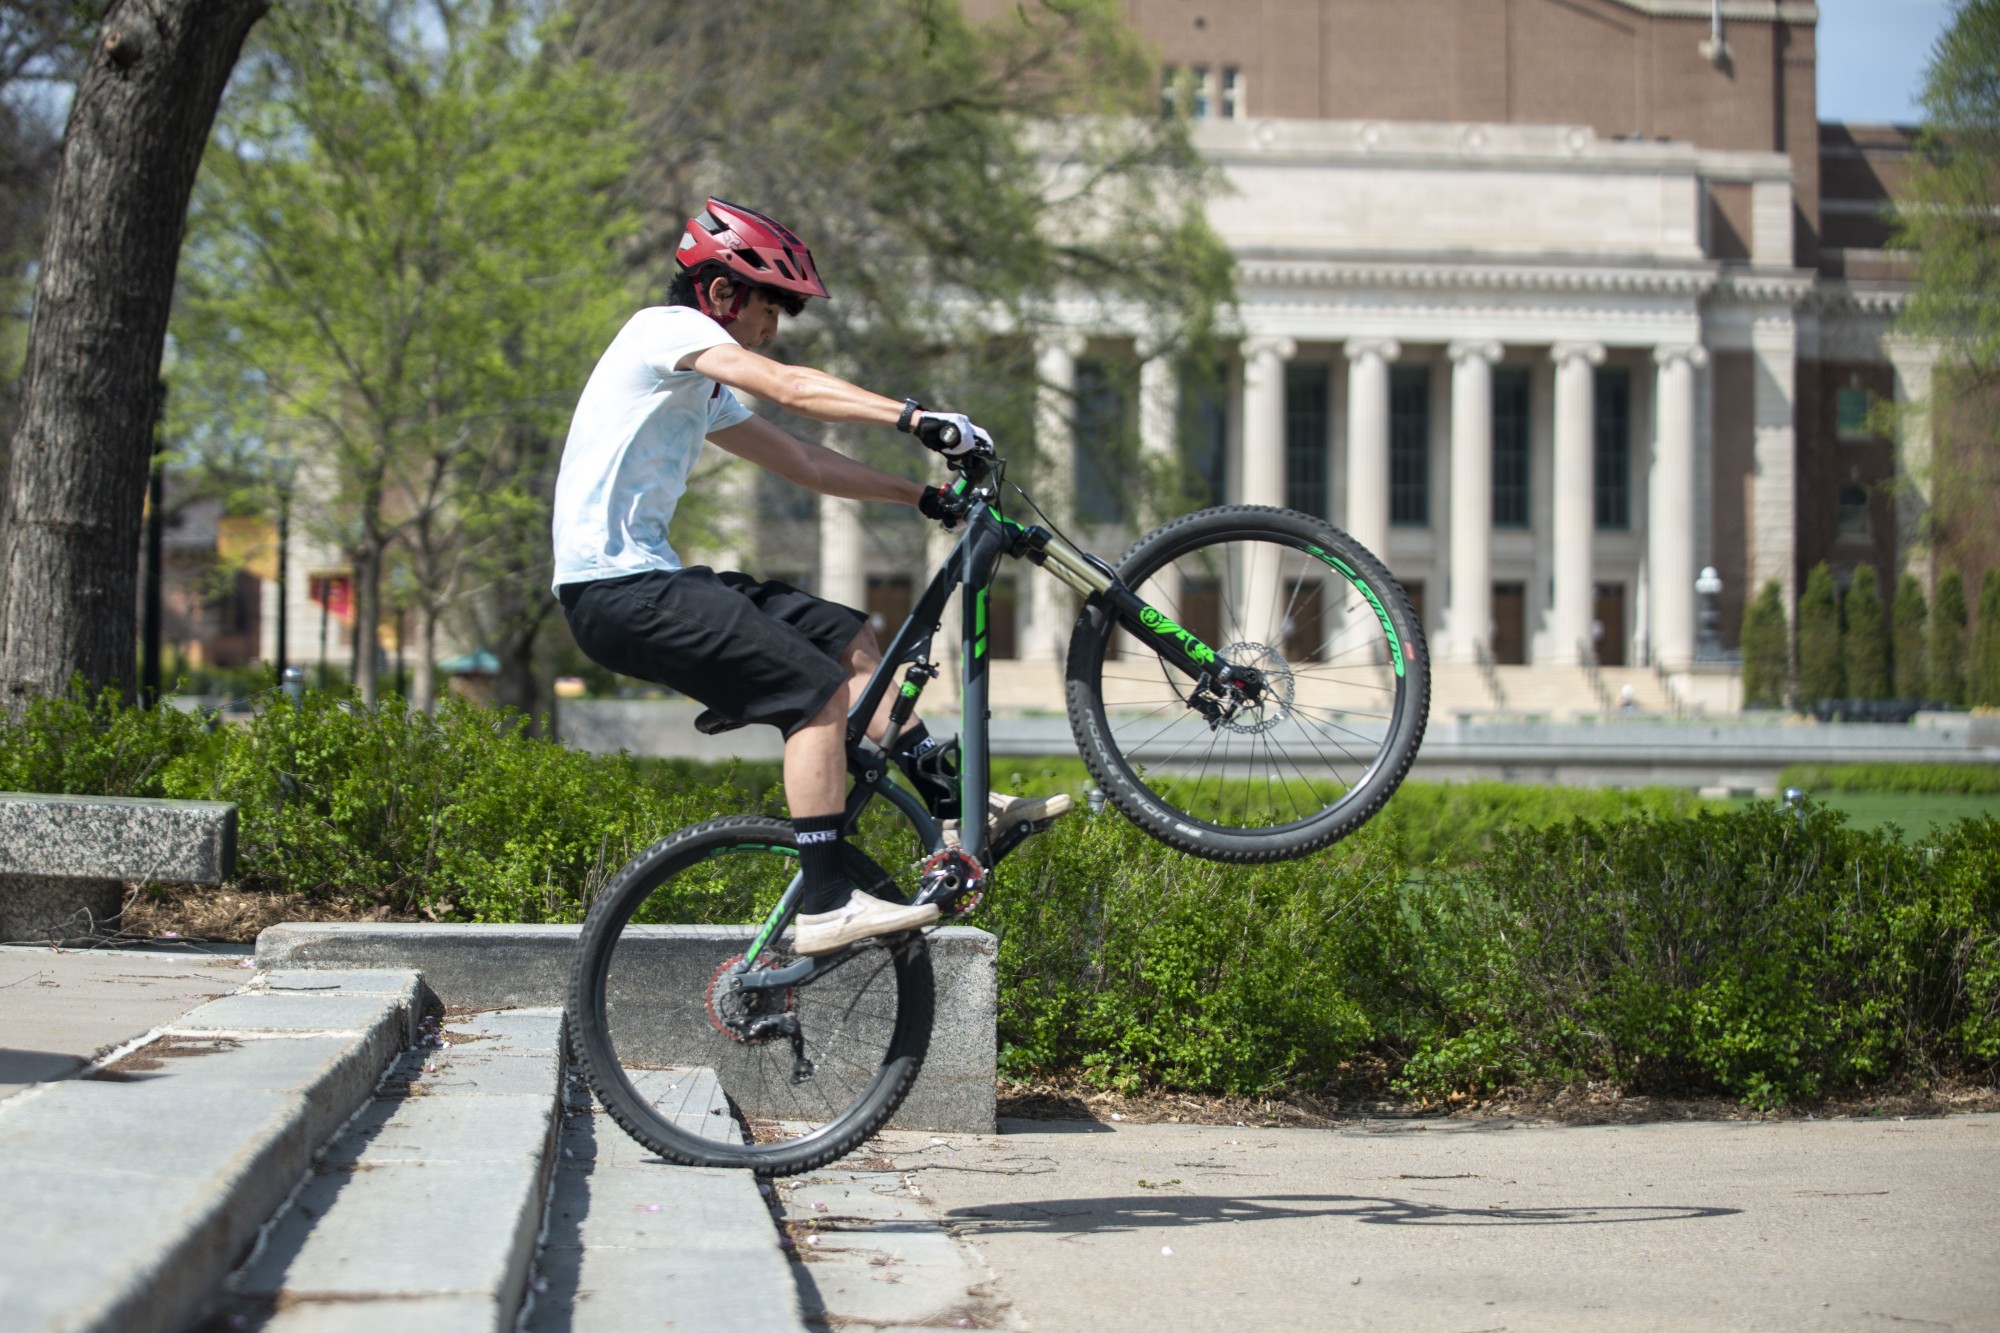 2:19 p.m.
Noah Charles rides his mountain bike down the steps in front of Smith Hall. 